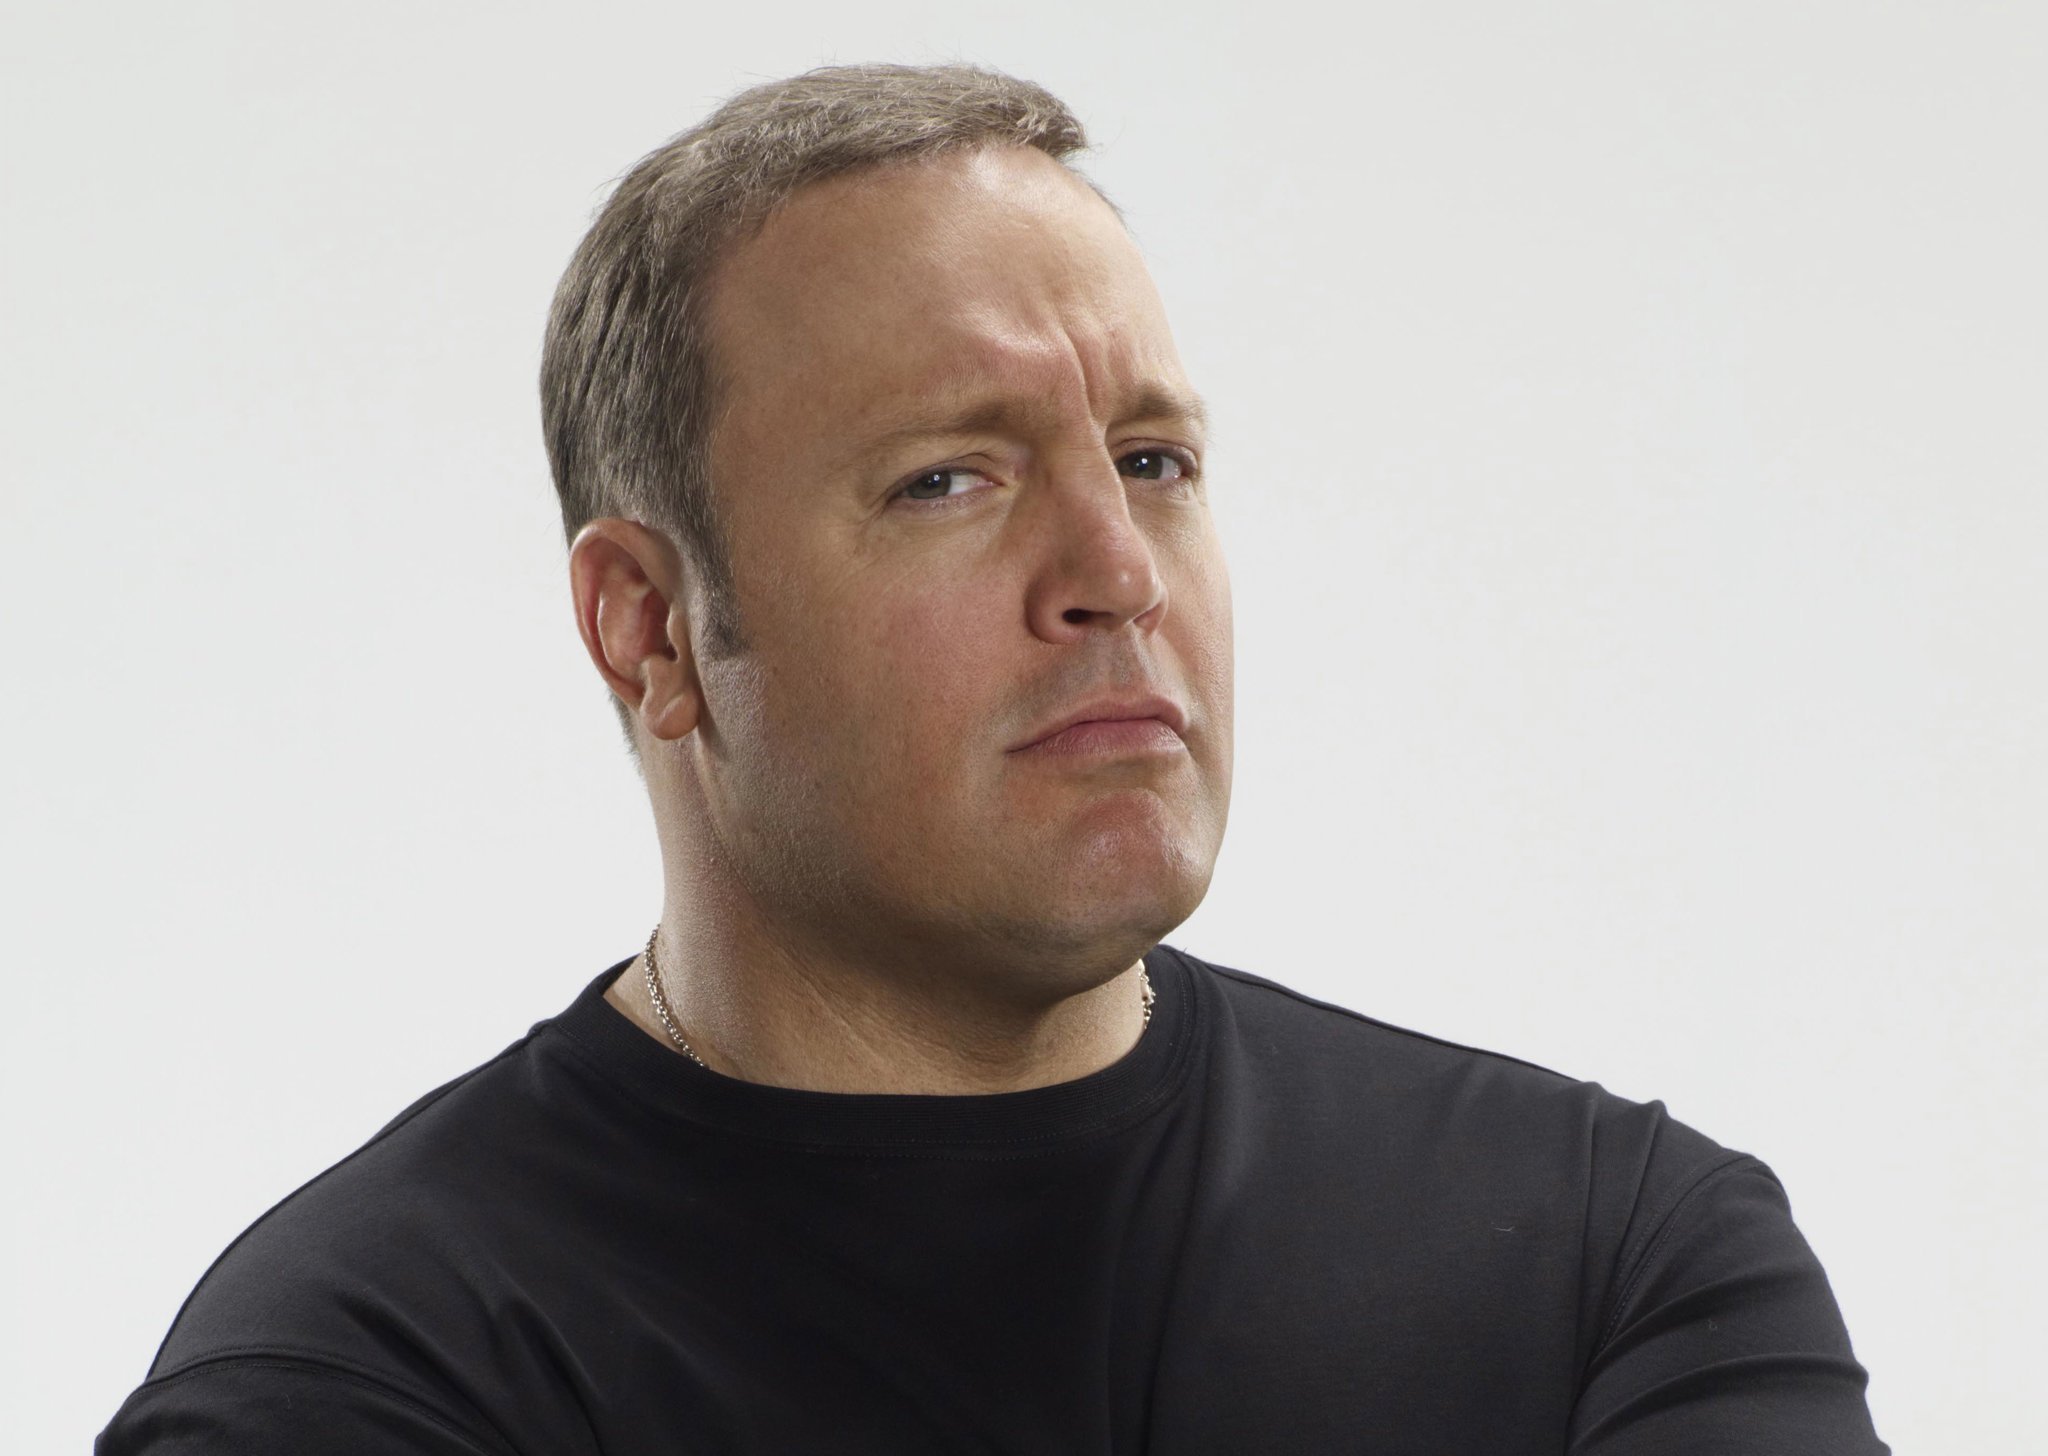 Kevin James tour 2022 How to buy tickets, schedule, dates